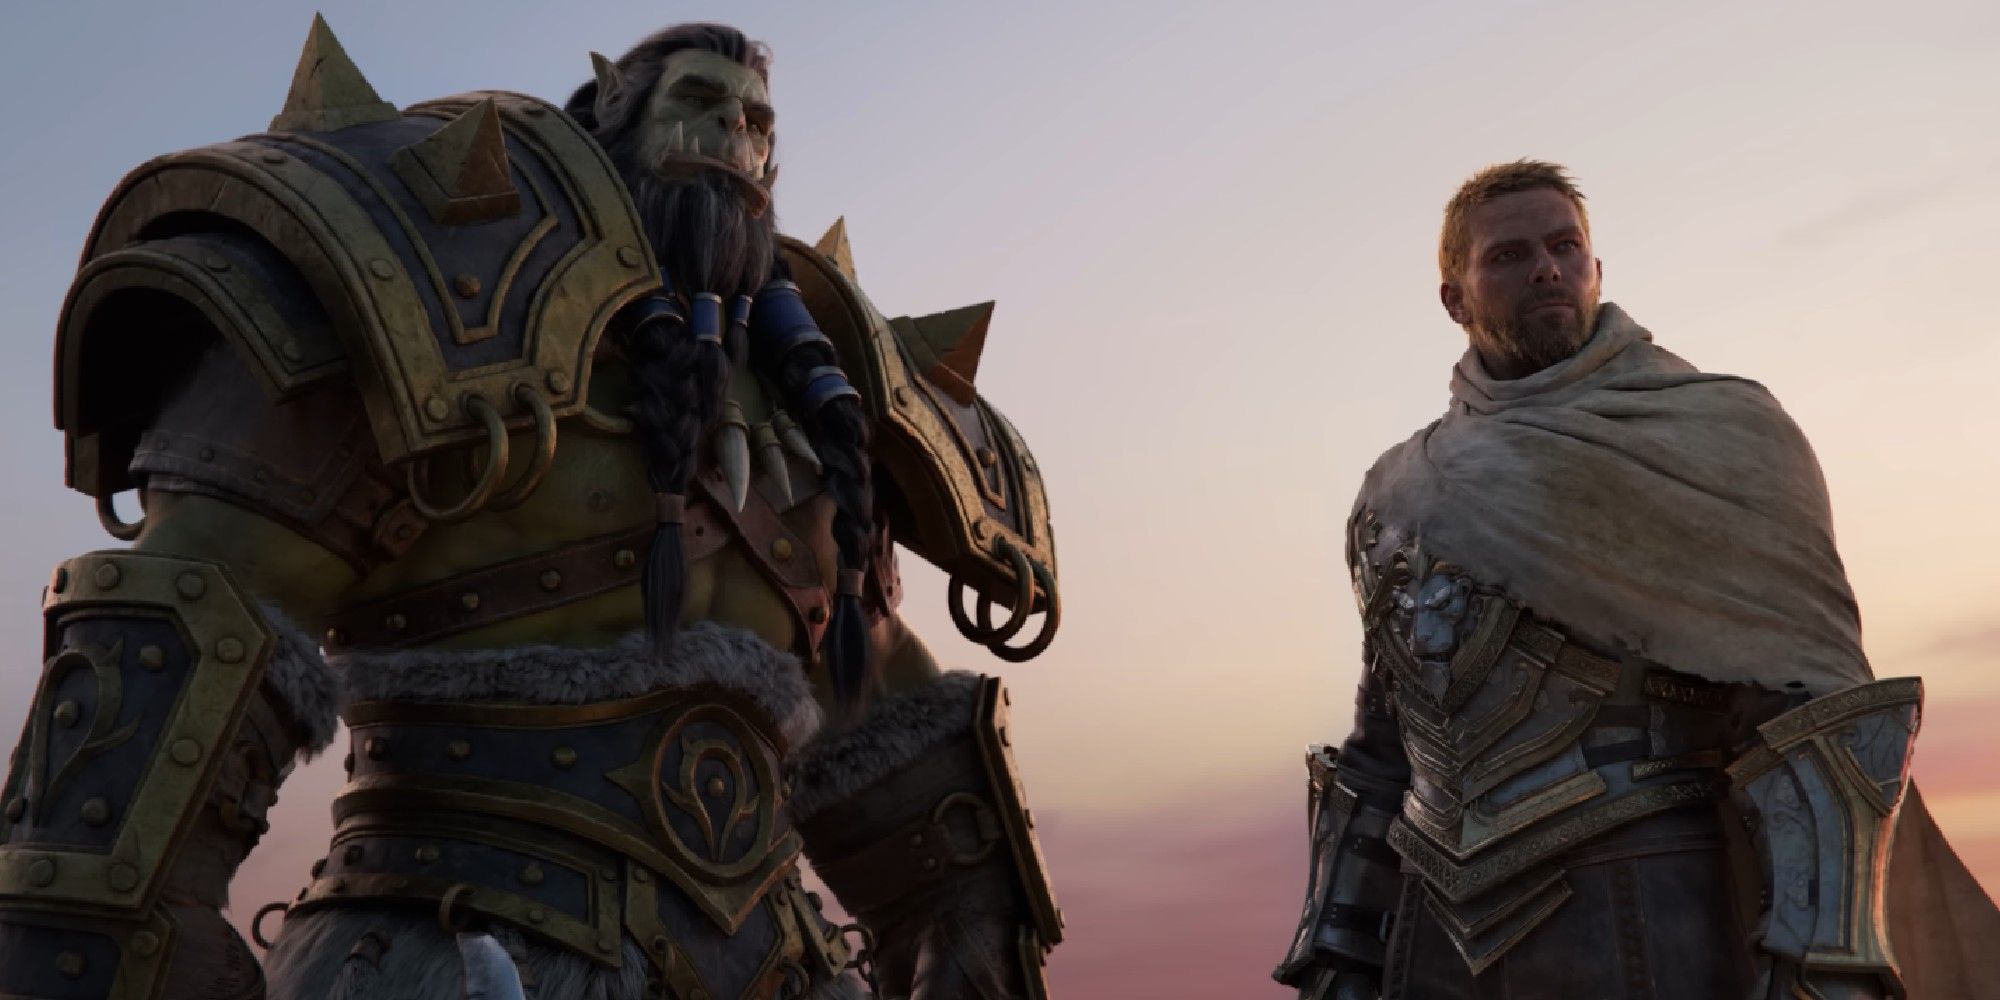 World of Warcraft Thrall and Anduin look past the camera